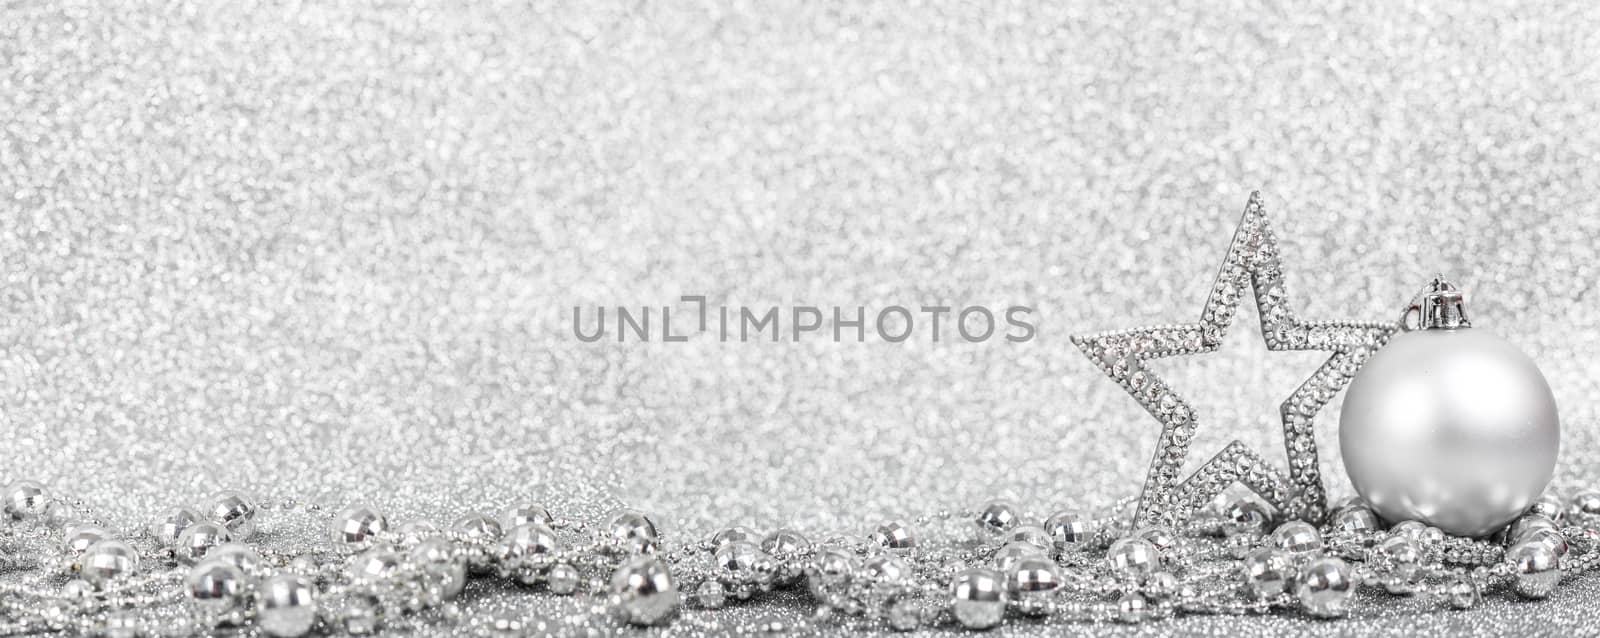 Christmas holiday composition of festive decor ball and star on silver glitter bokeh background